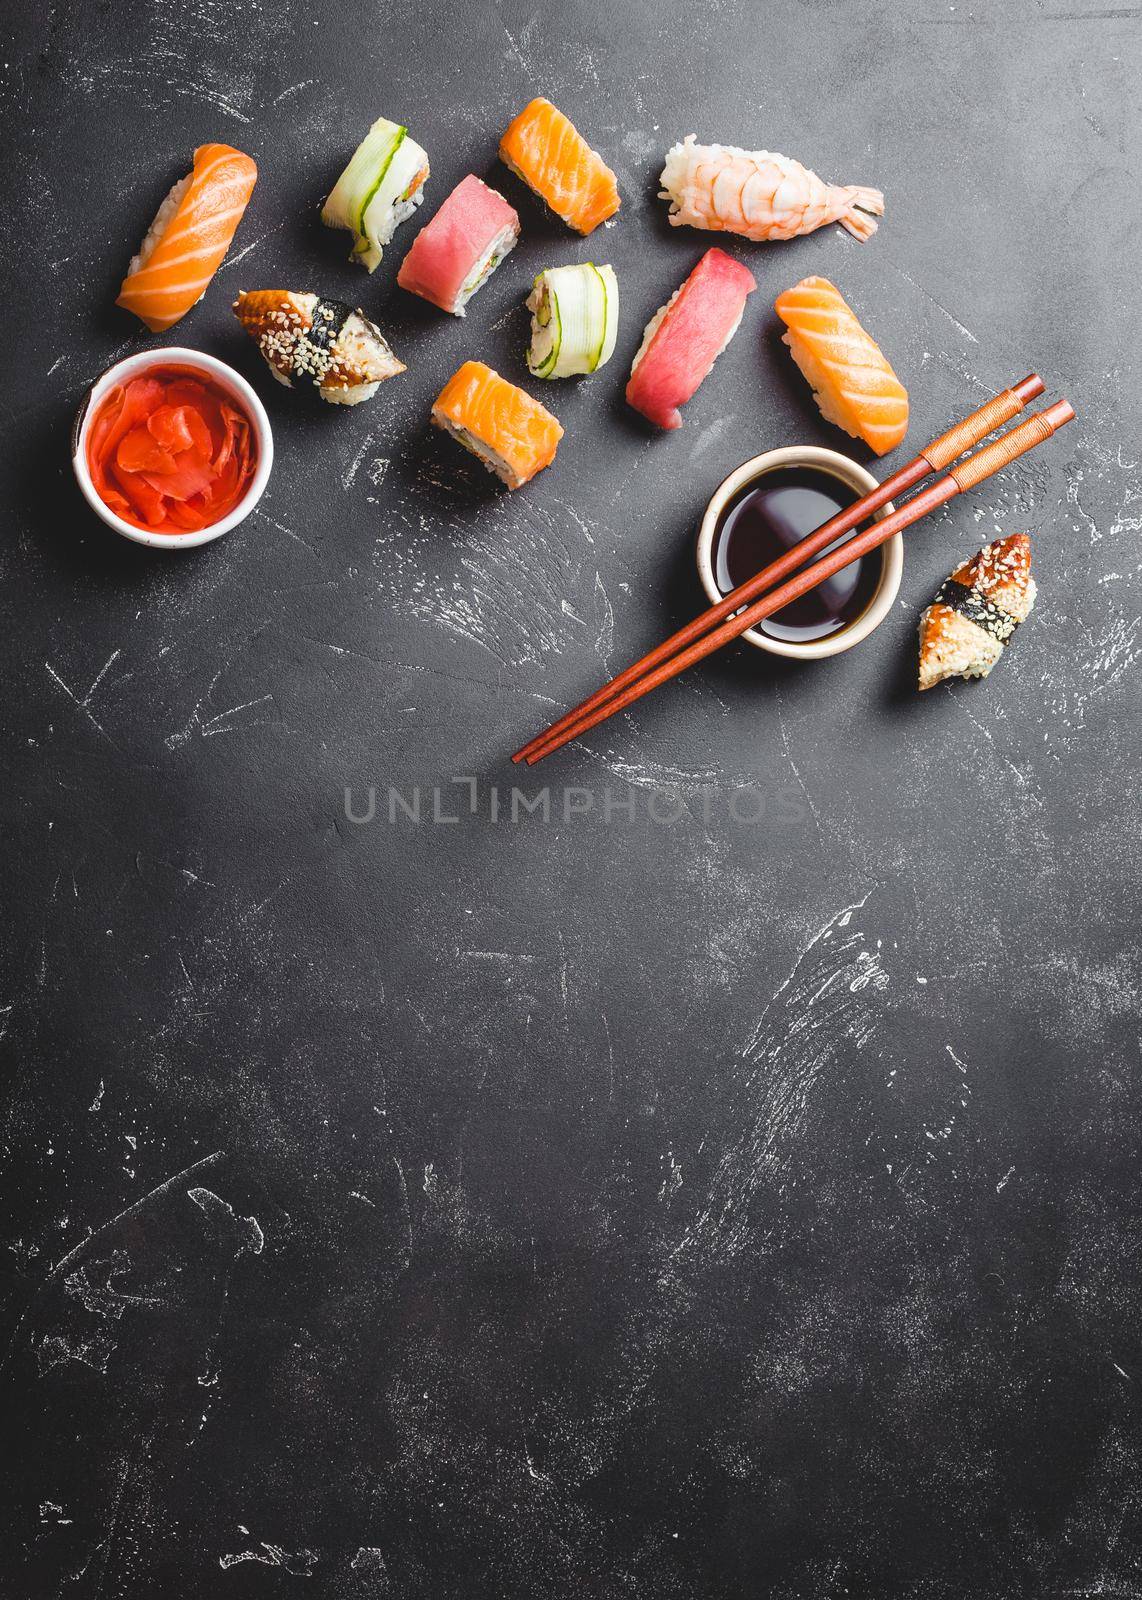 Top view of assorted mixed Japanese sushi set with rolls, nigiri, soy sauce, ginger, chopsticks on black concrete background with free space for text. Asian dinner or lunch .